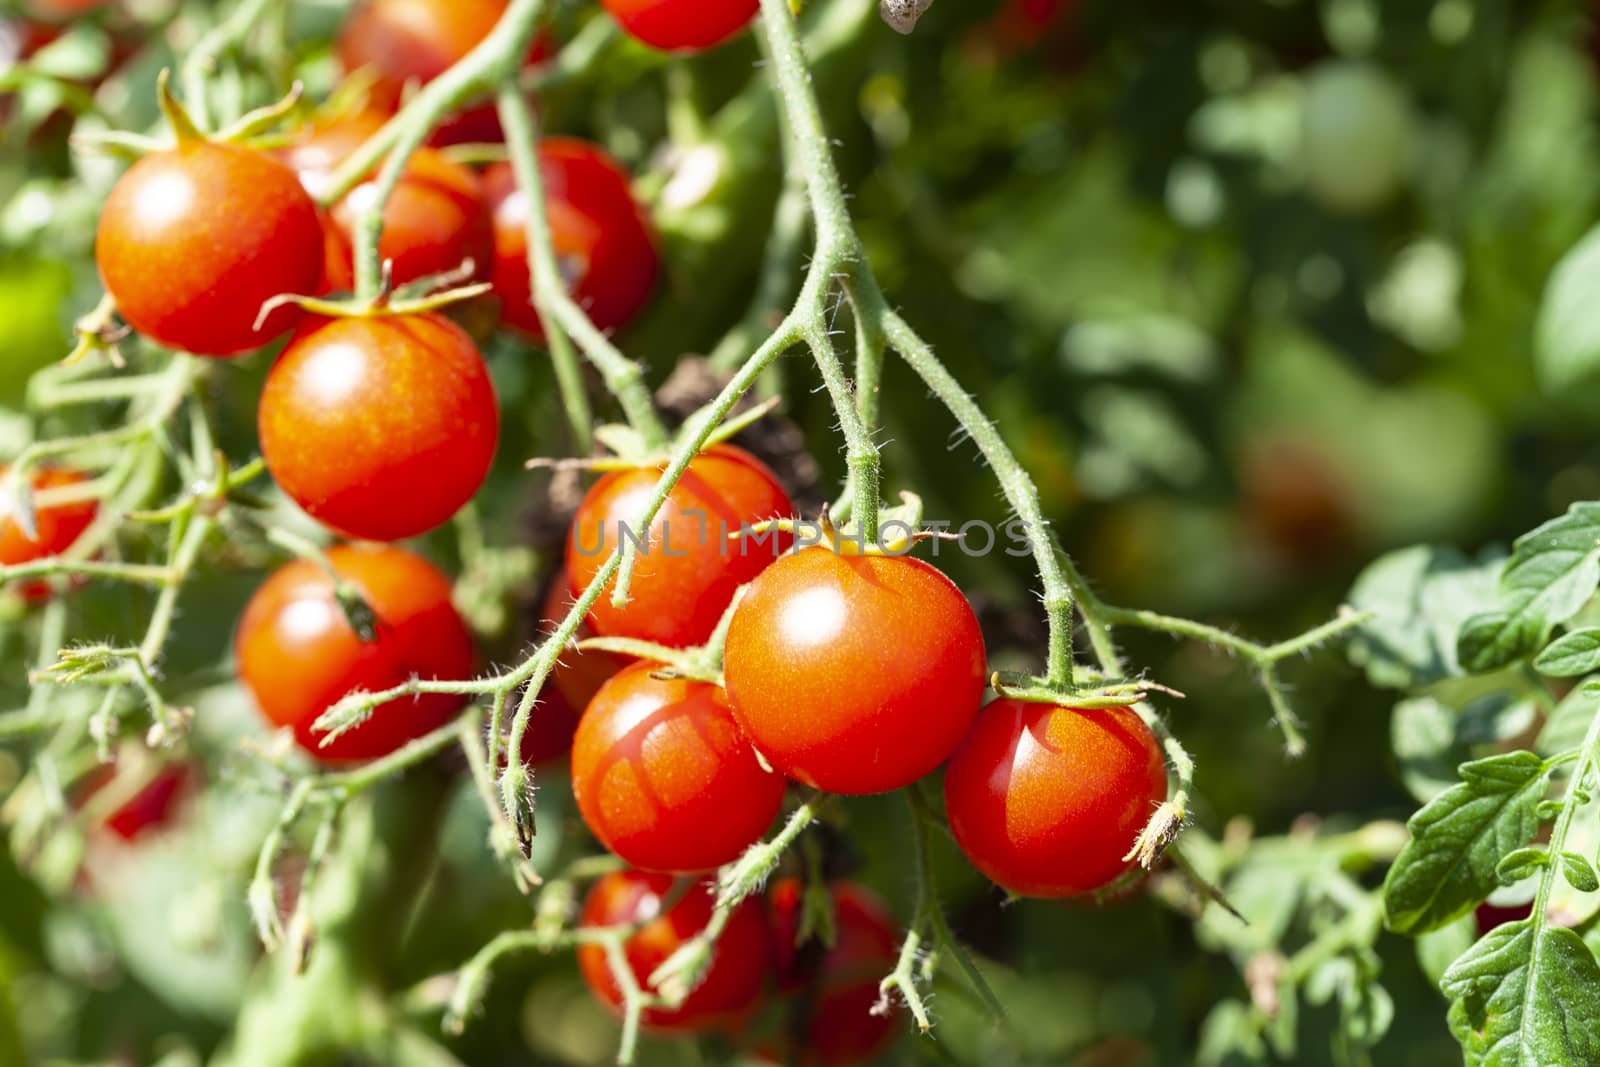 Red Tasty Cherry Tomatoes by orcearo